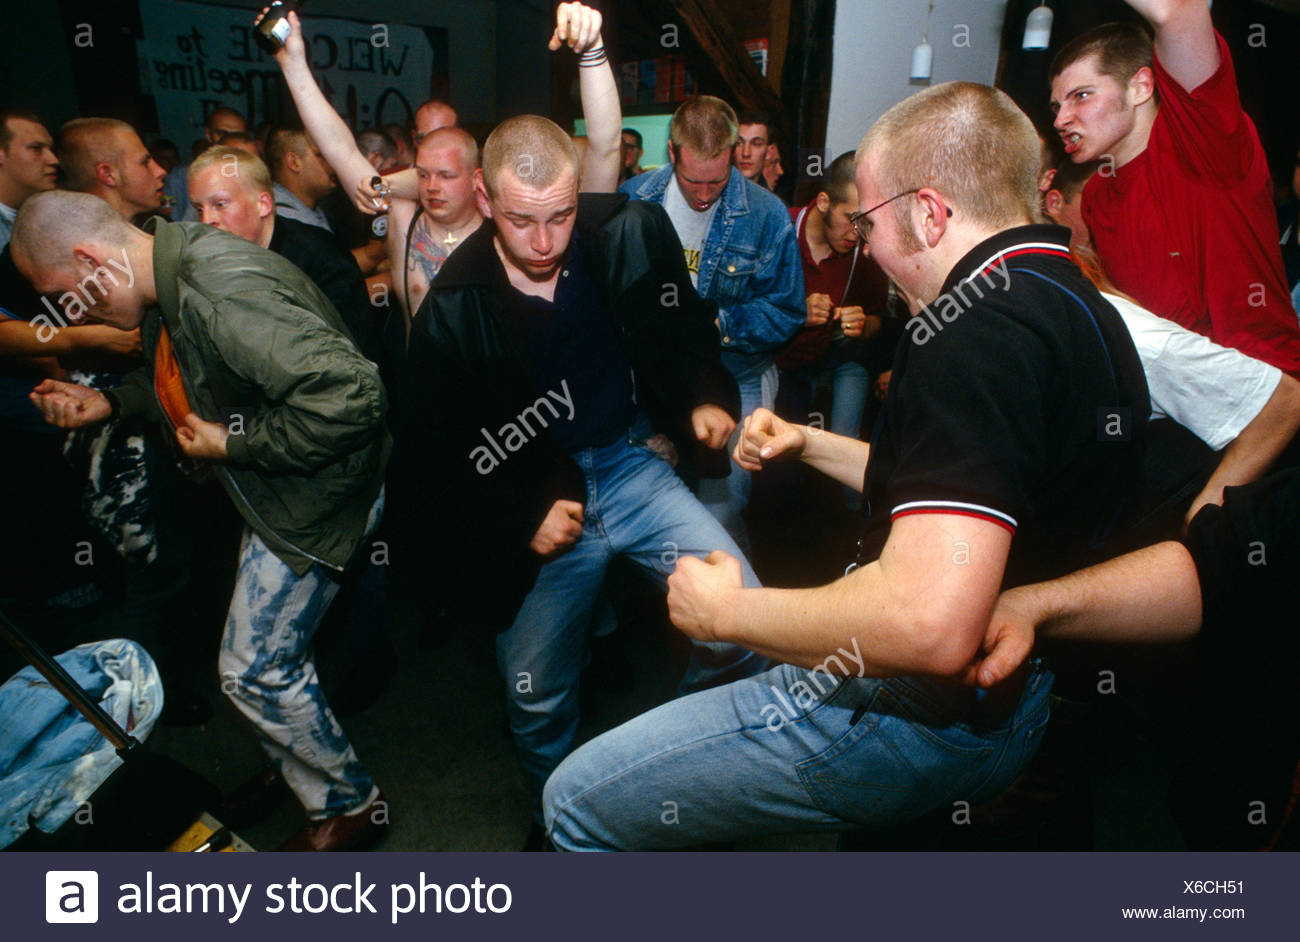 German Skinheads High Resolution Stock Photography and Images - Alamy 